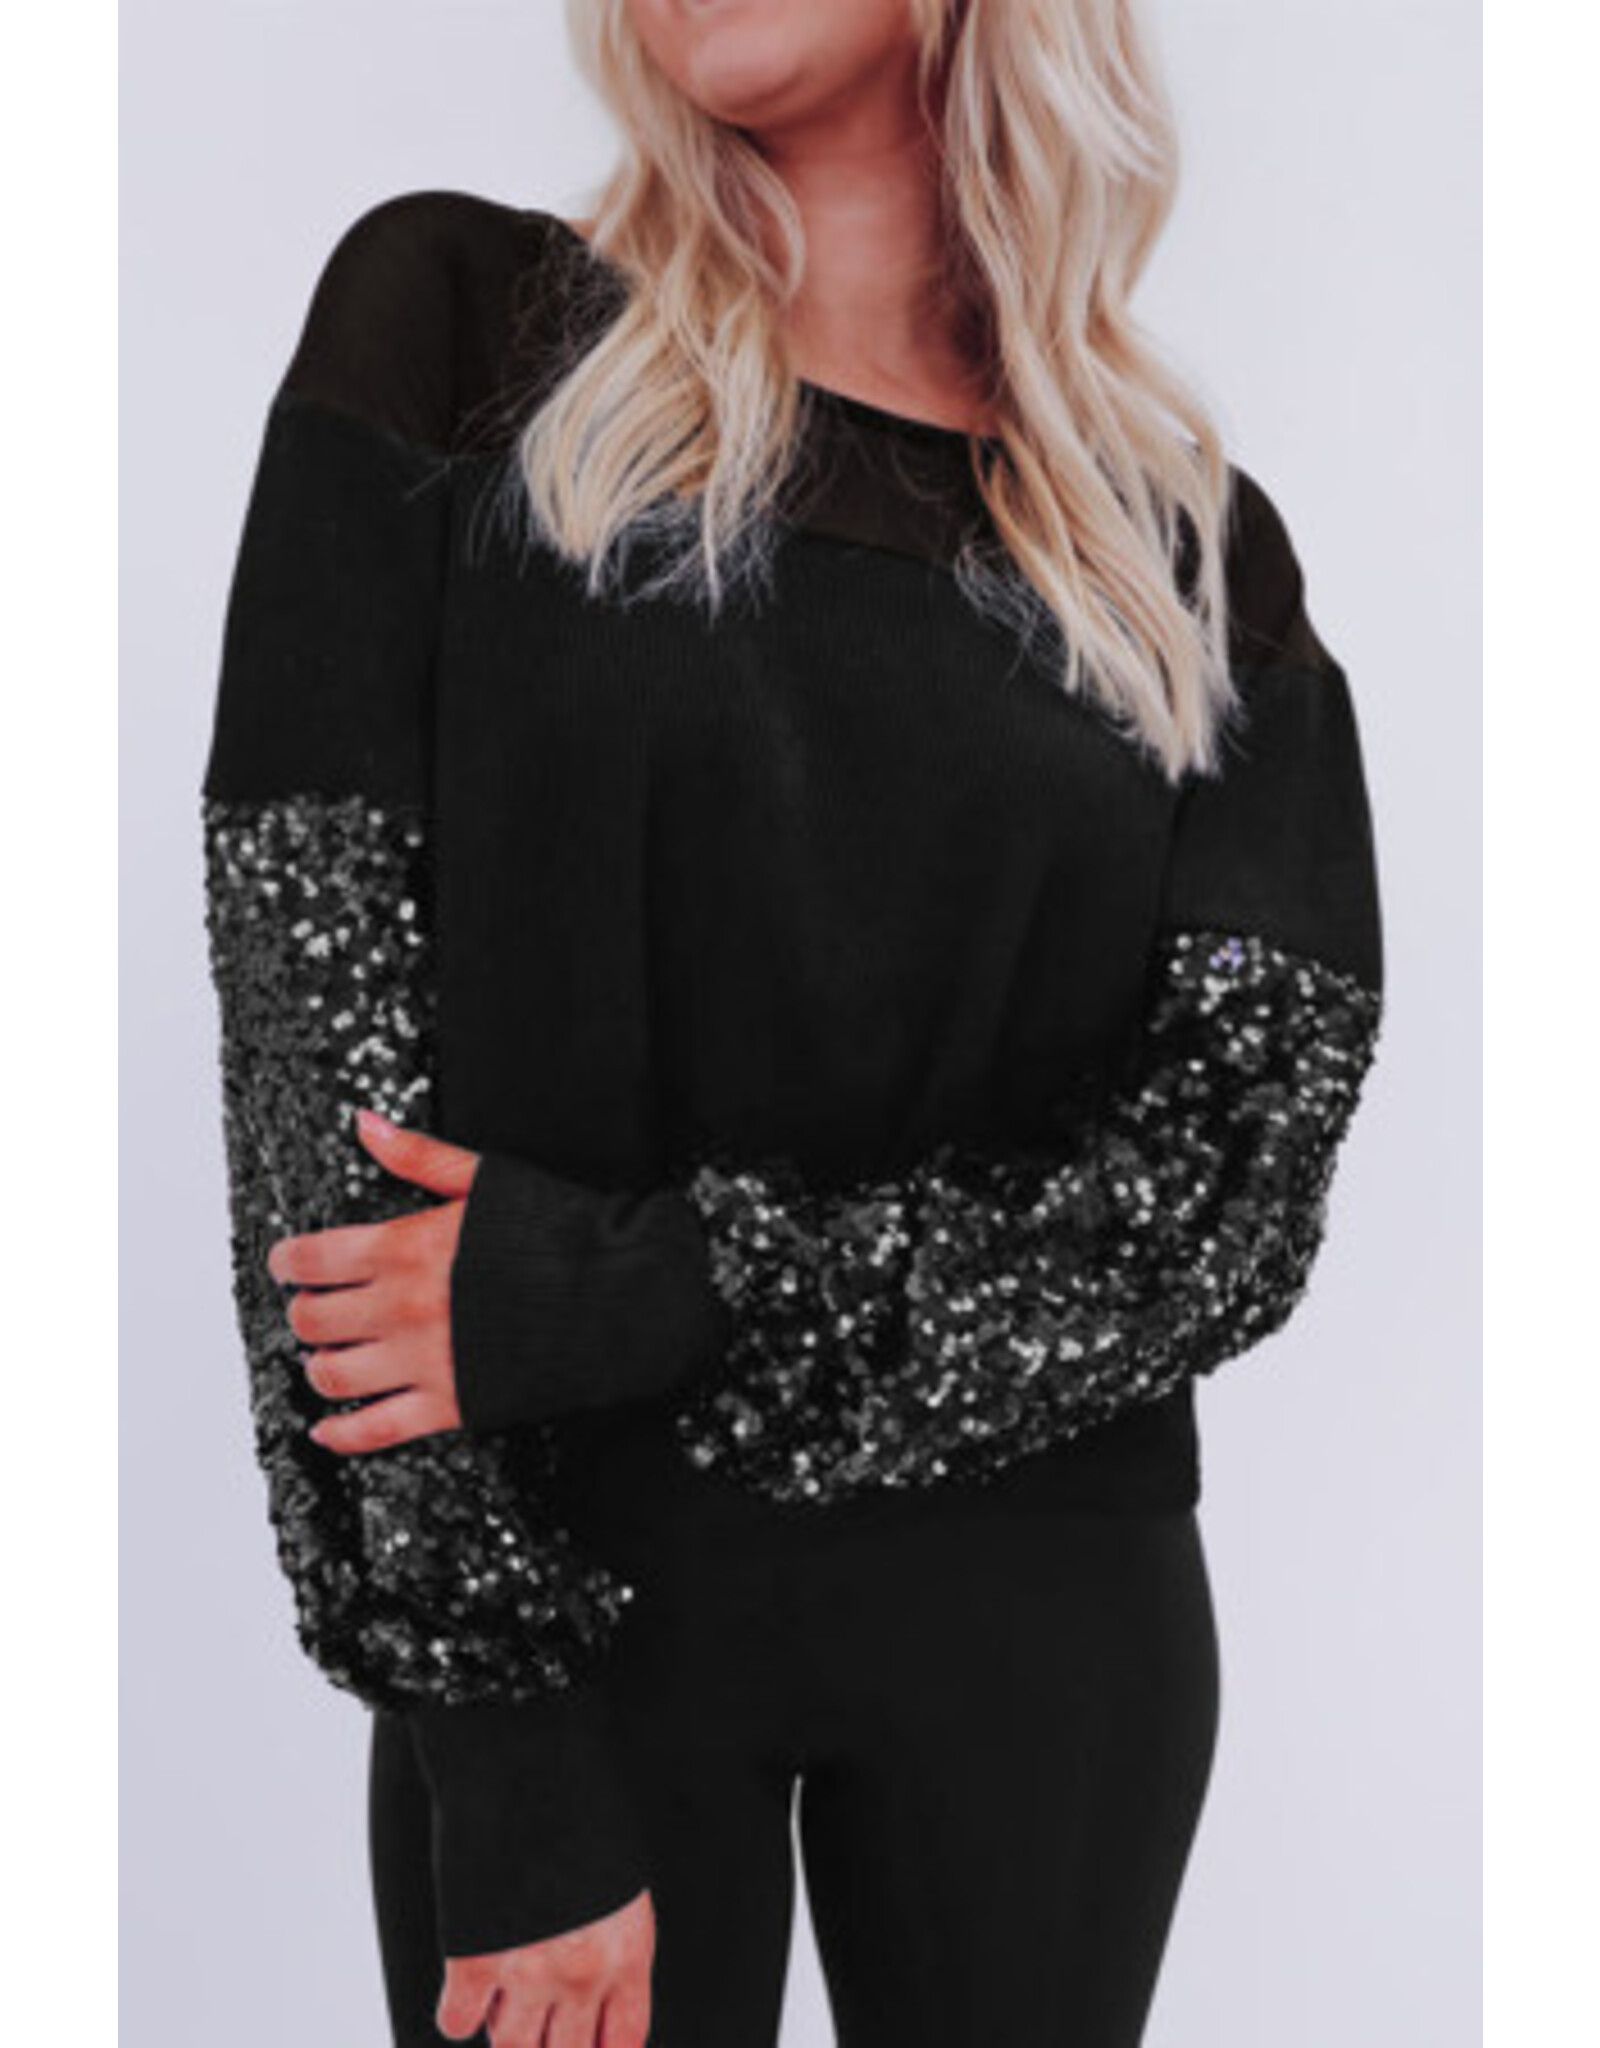 The Ritzy Gypsy Black Sequin Blouse